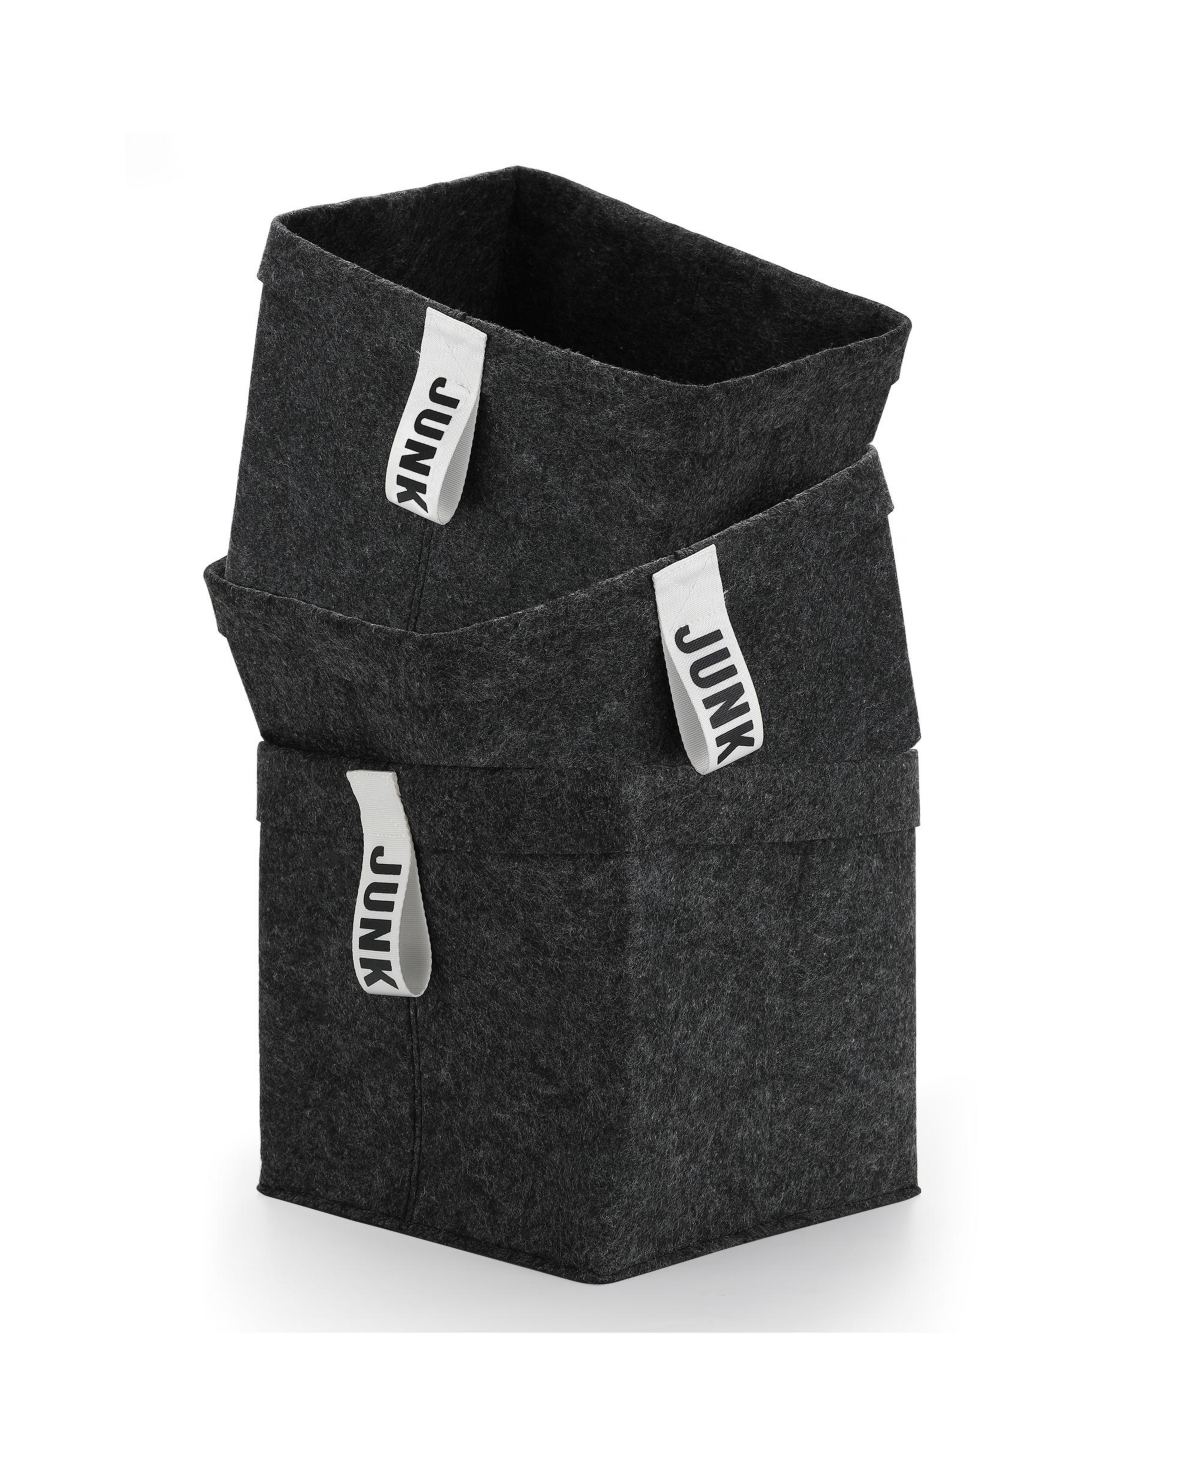 3 Piece Collapsible Square Storage Bins with Printed Handles - Charcoal